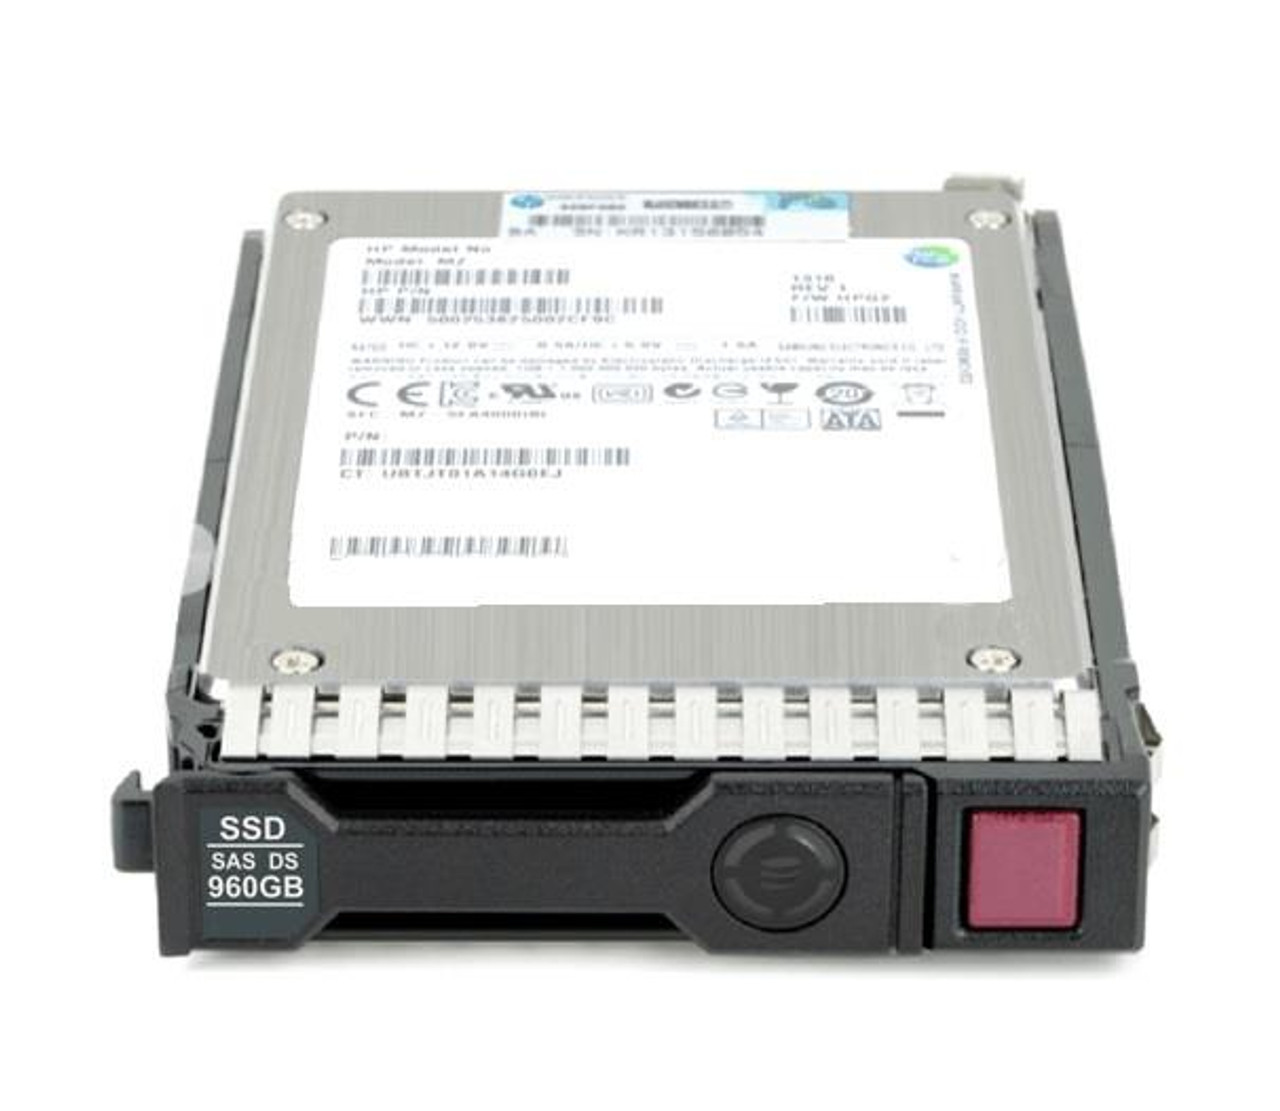 875682 HPE 960GB SAS 12Gbps Read Intensive 2.5-inch Internal Solid State Drive (SSD) with Smart Carrier